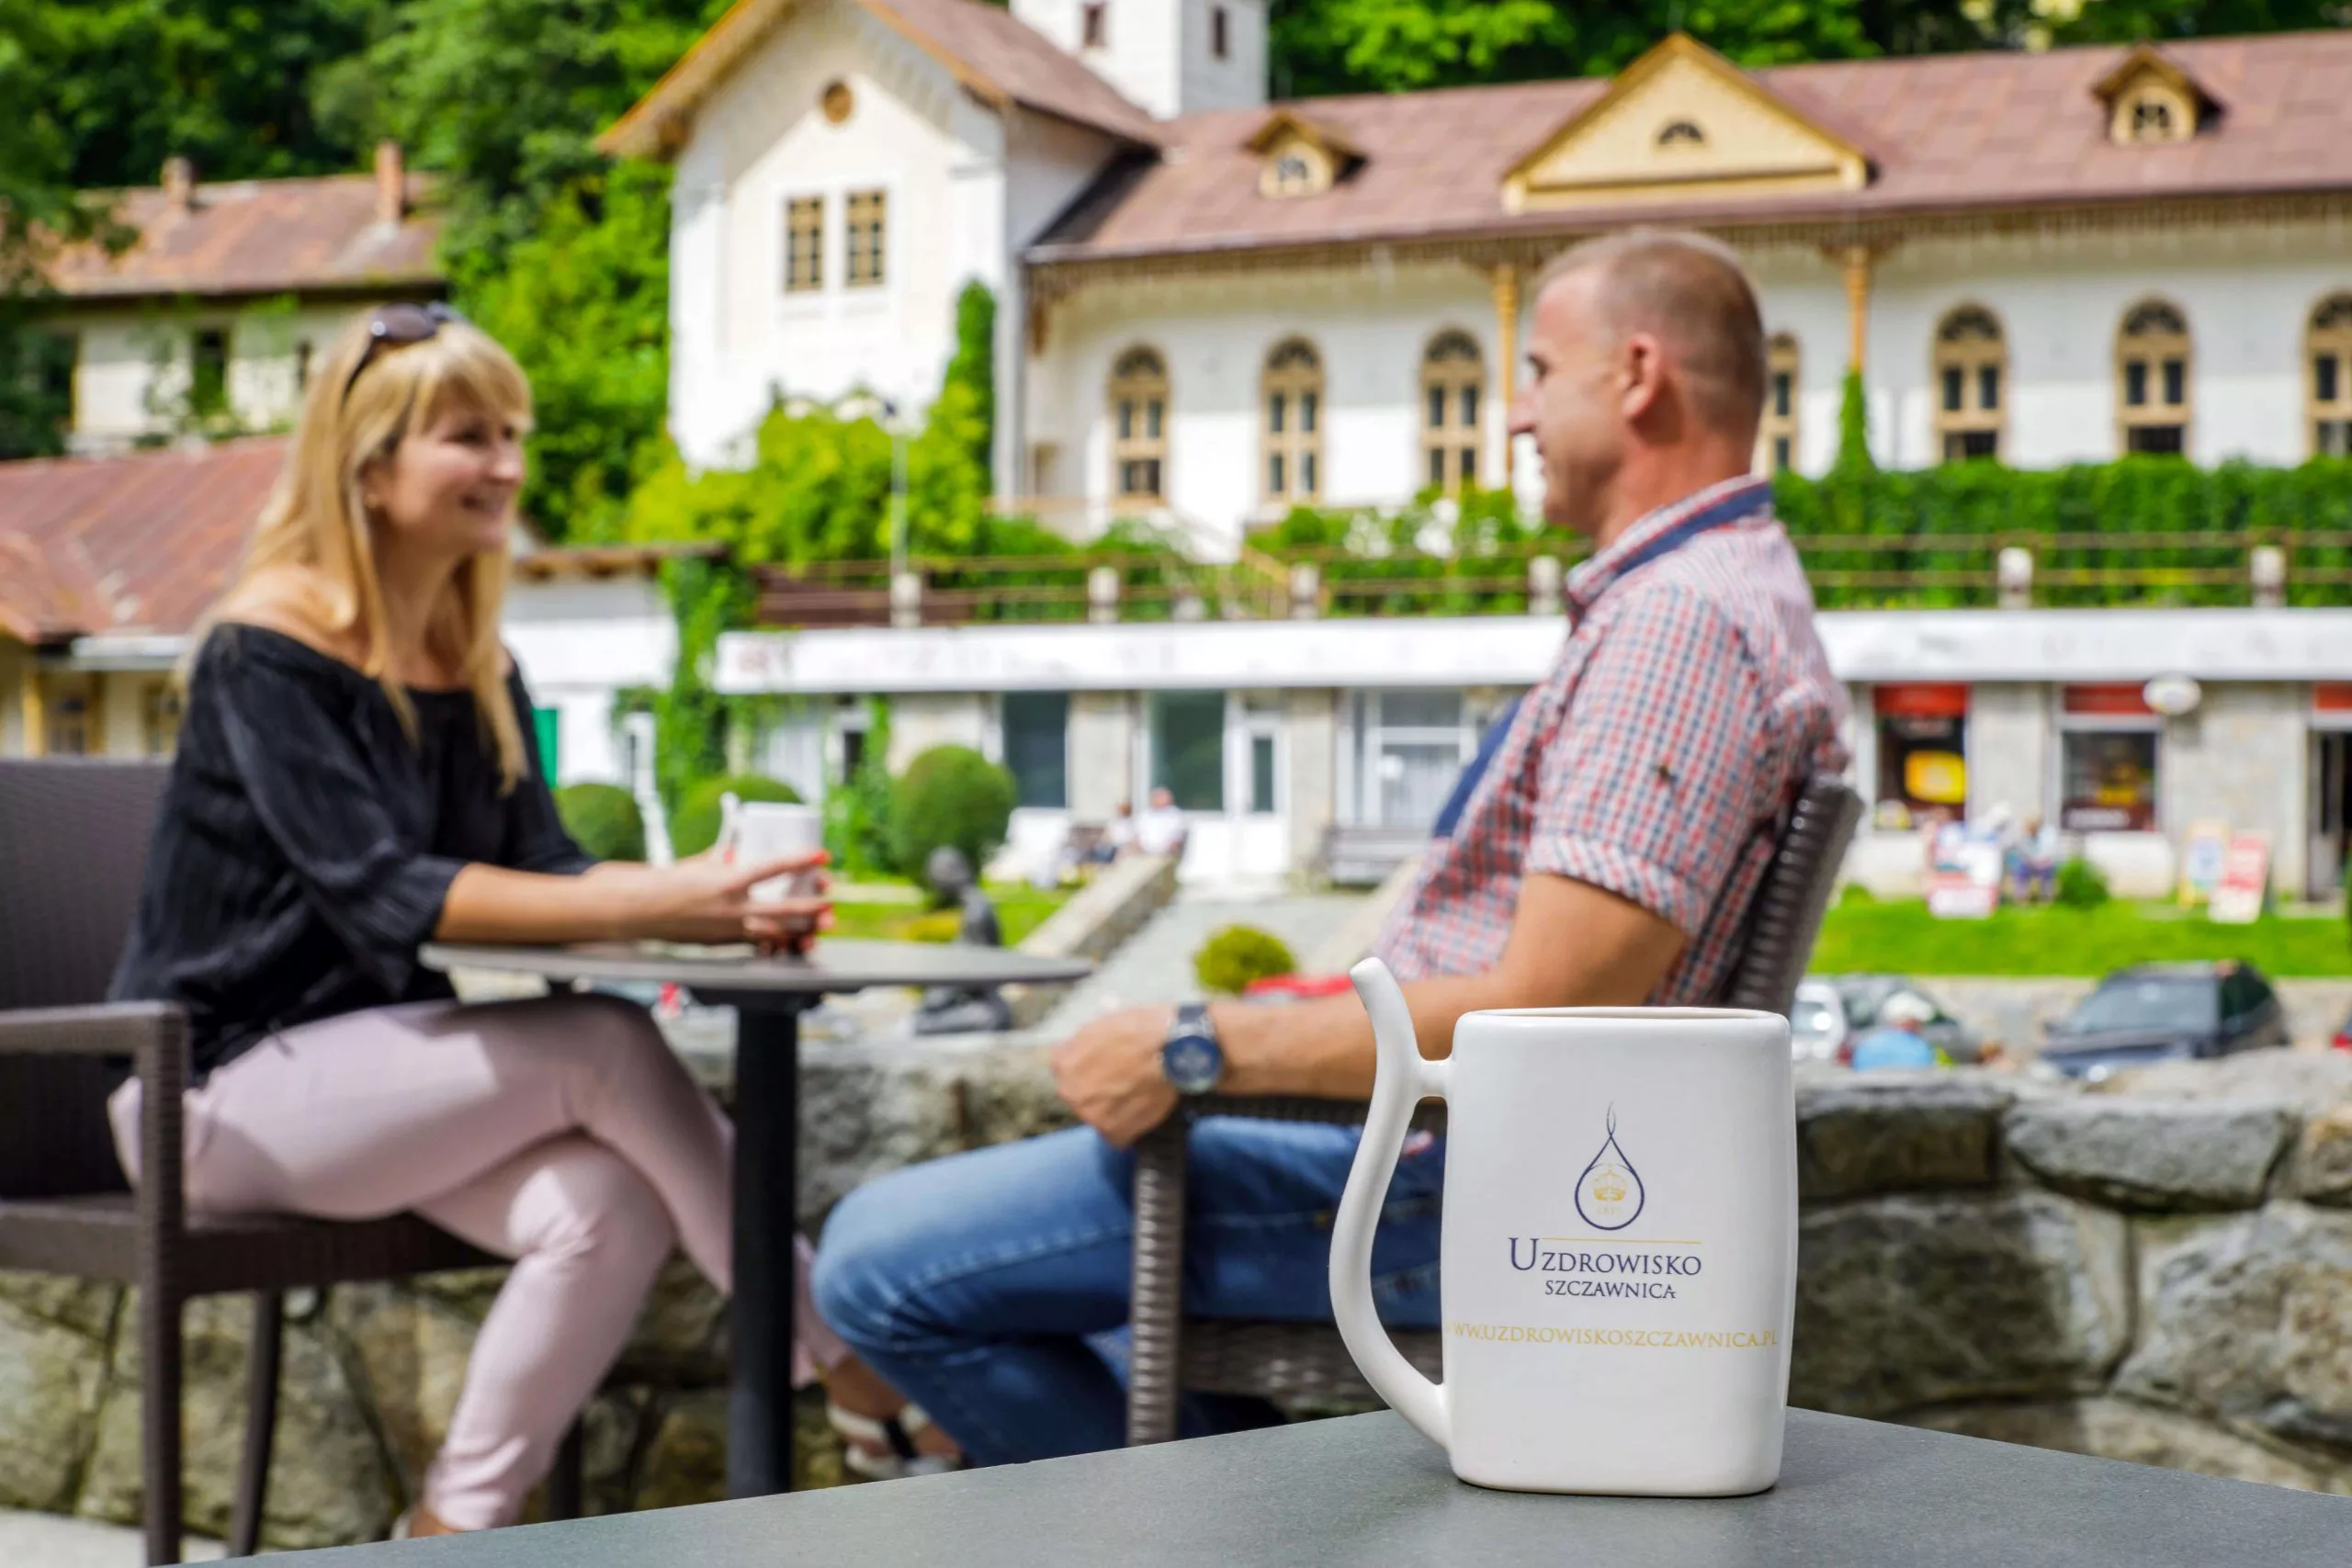 A white spa-cup with the logo and name of Szczawnica Spa provides the foreground for a middle-aged couple sitting at a black table. The blurred background consists of red-roofed white spa buildings among greenery.